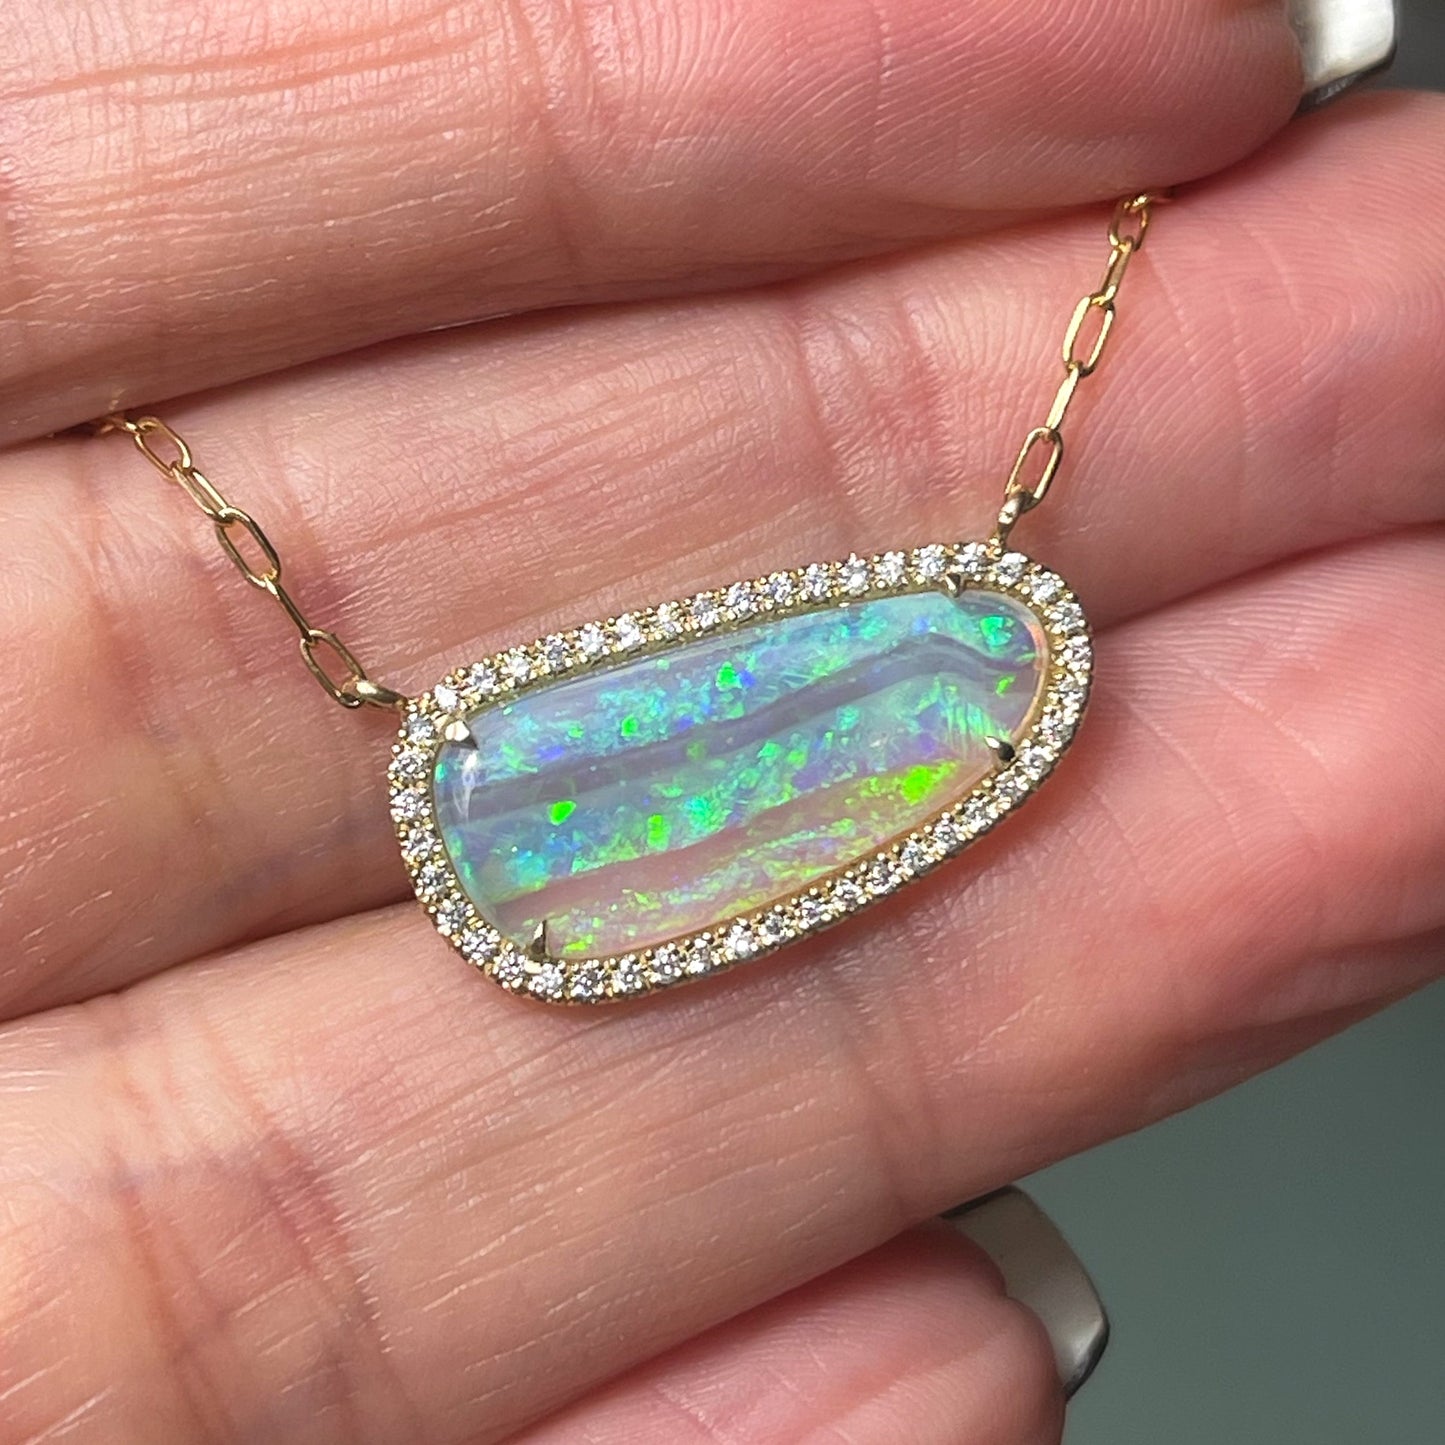 An Australian Opal Necklace by NIXIN Jewelry with a Crystal Opal surrounded by pave diamonds.